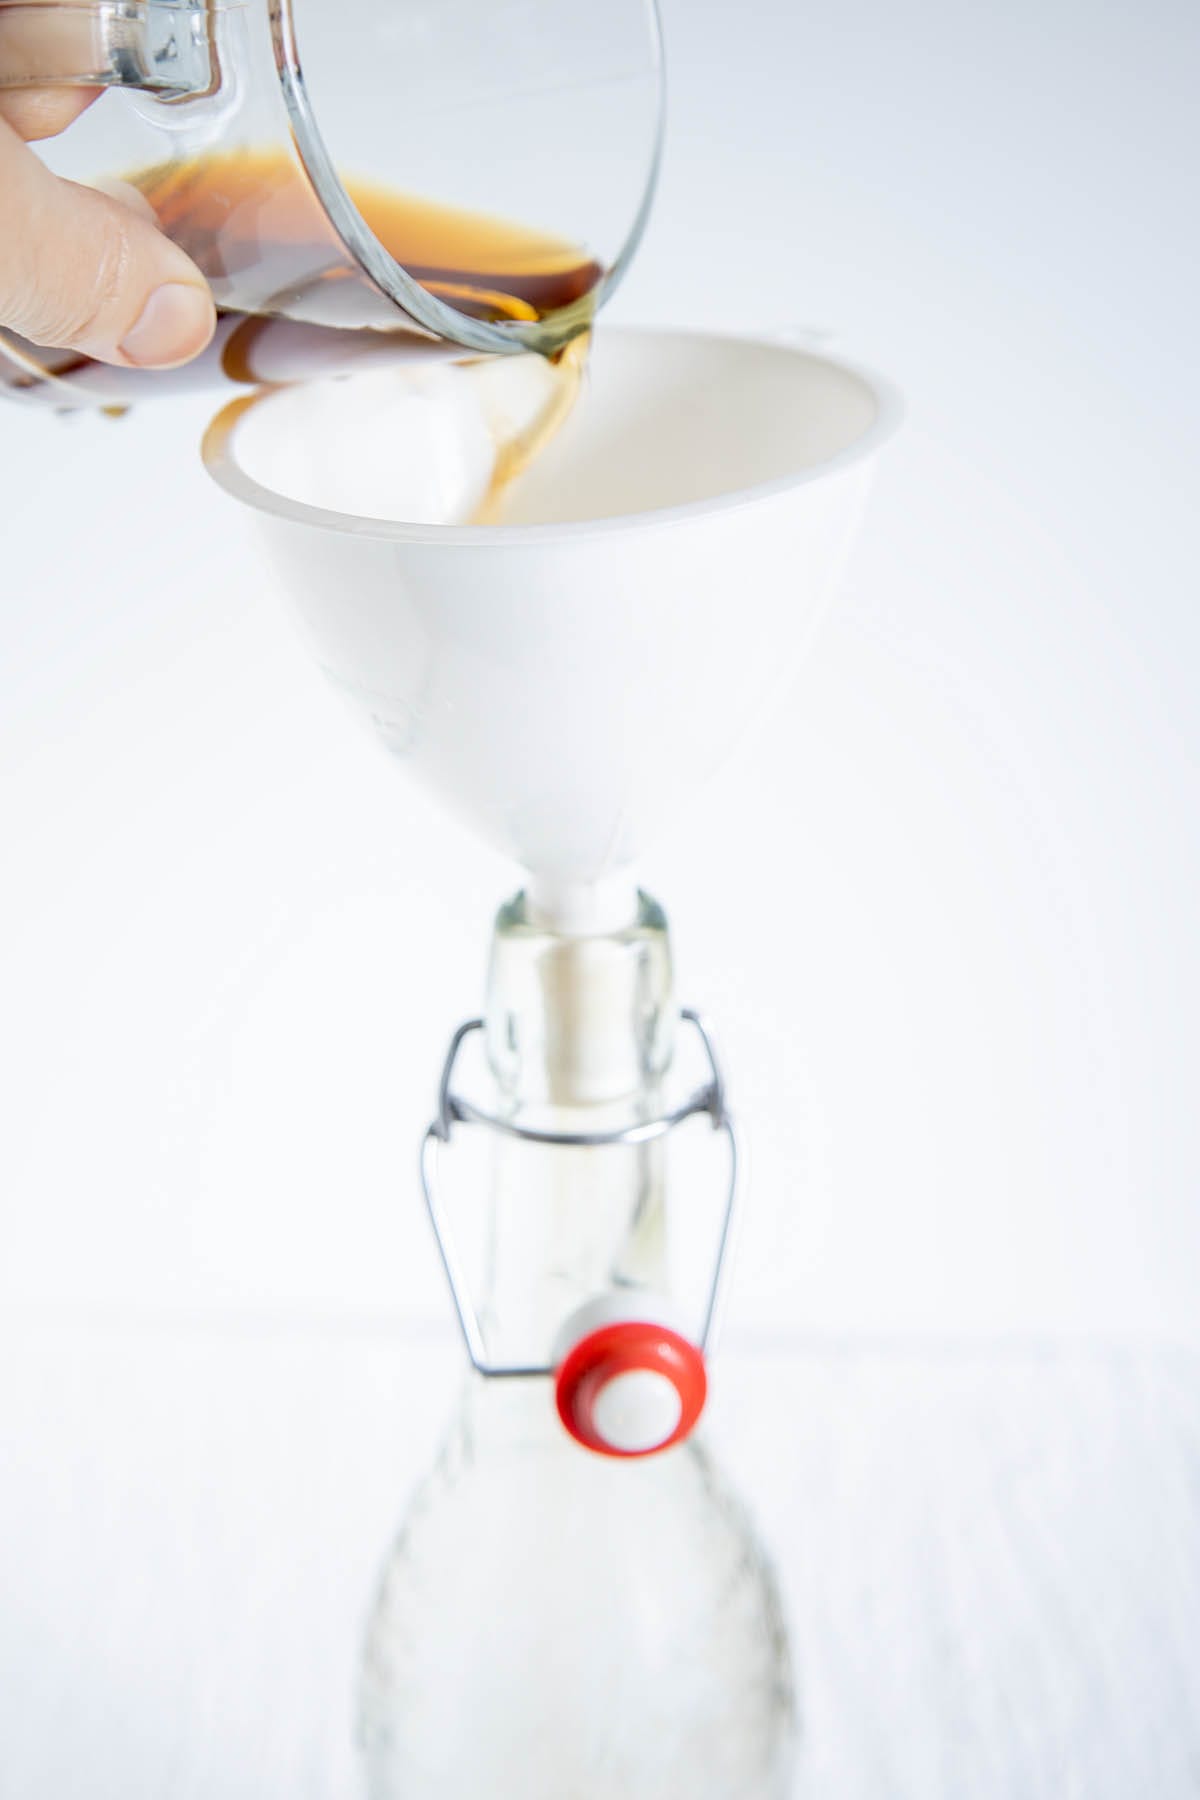 Coffee being poured into a funnel into a bottle.